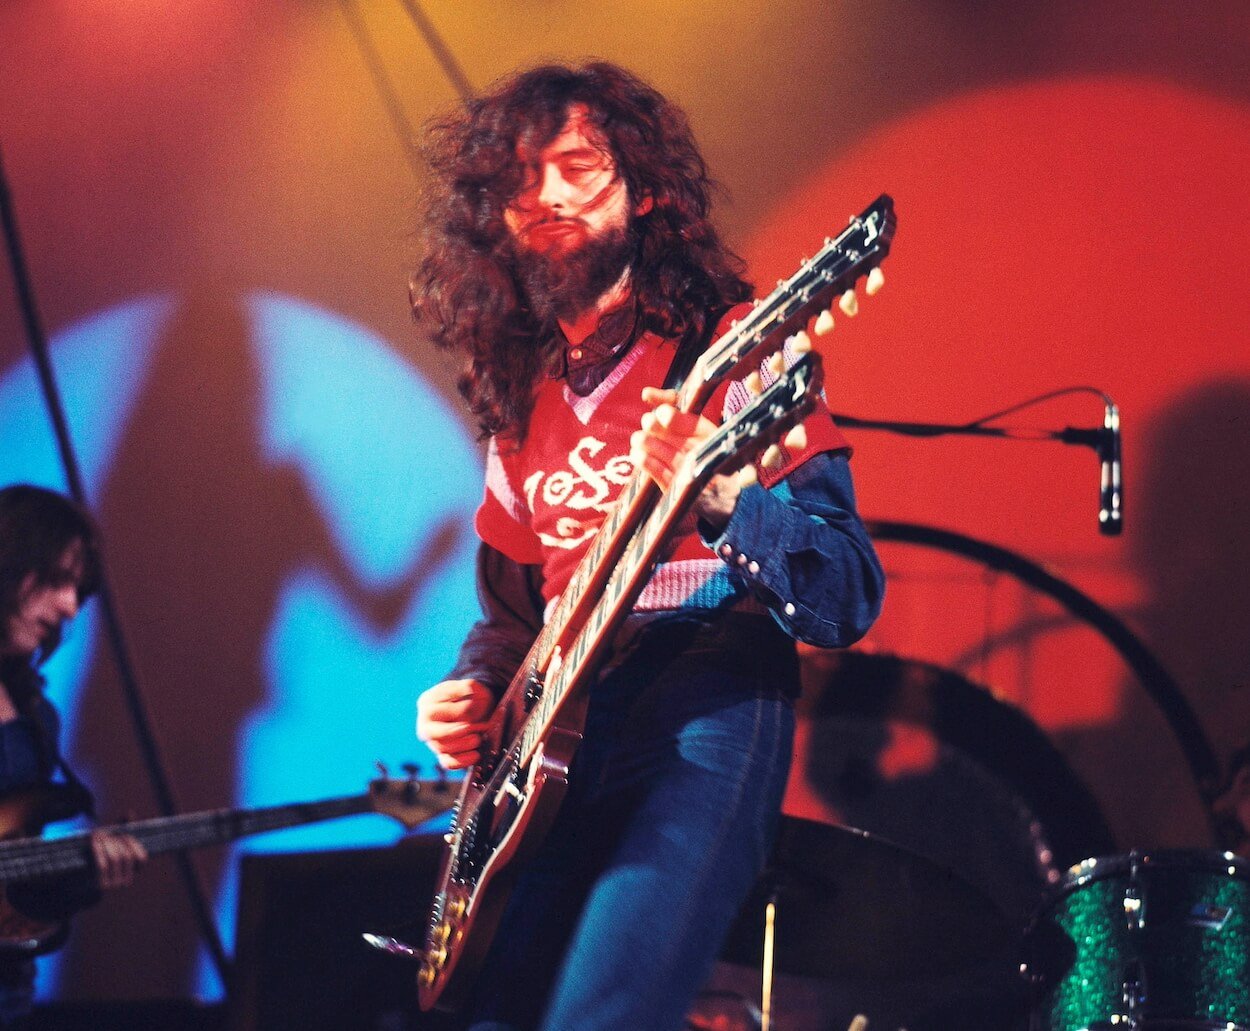 Led Zeppelin's Jimmy Page playing a double-necked guitar and standing in front of a multi-colored background during a 1971 concert.